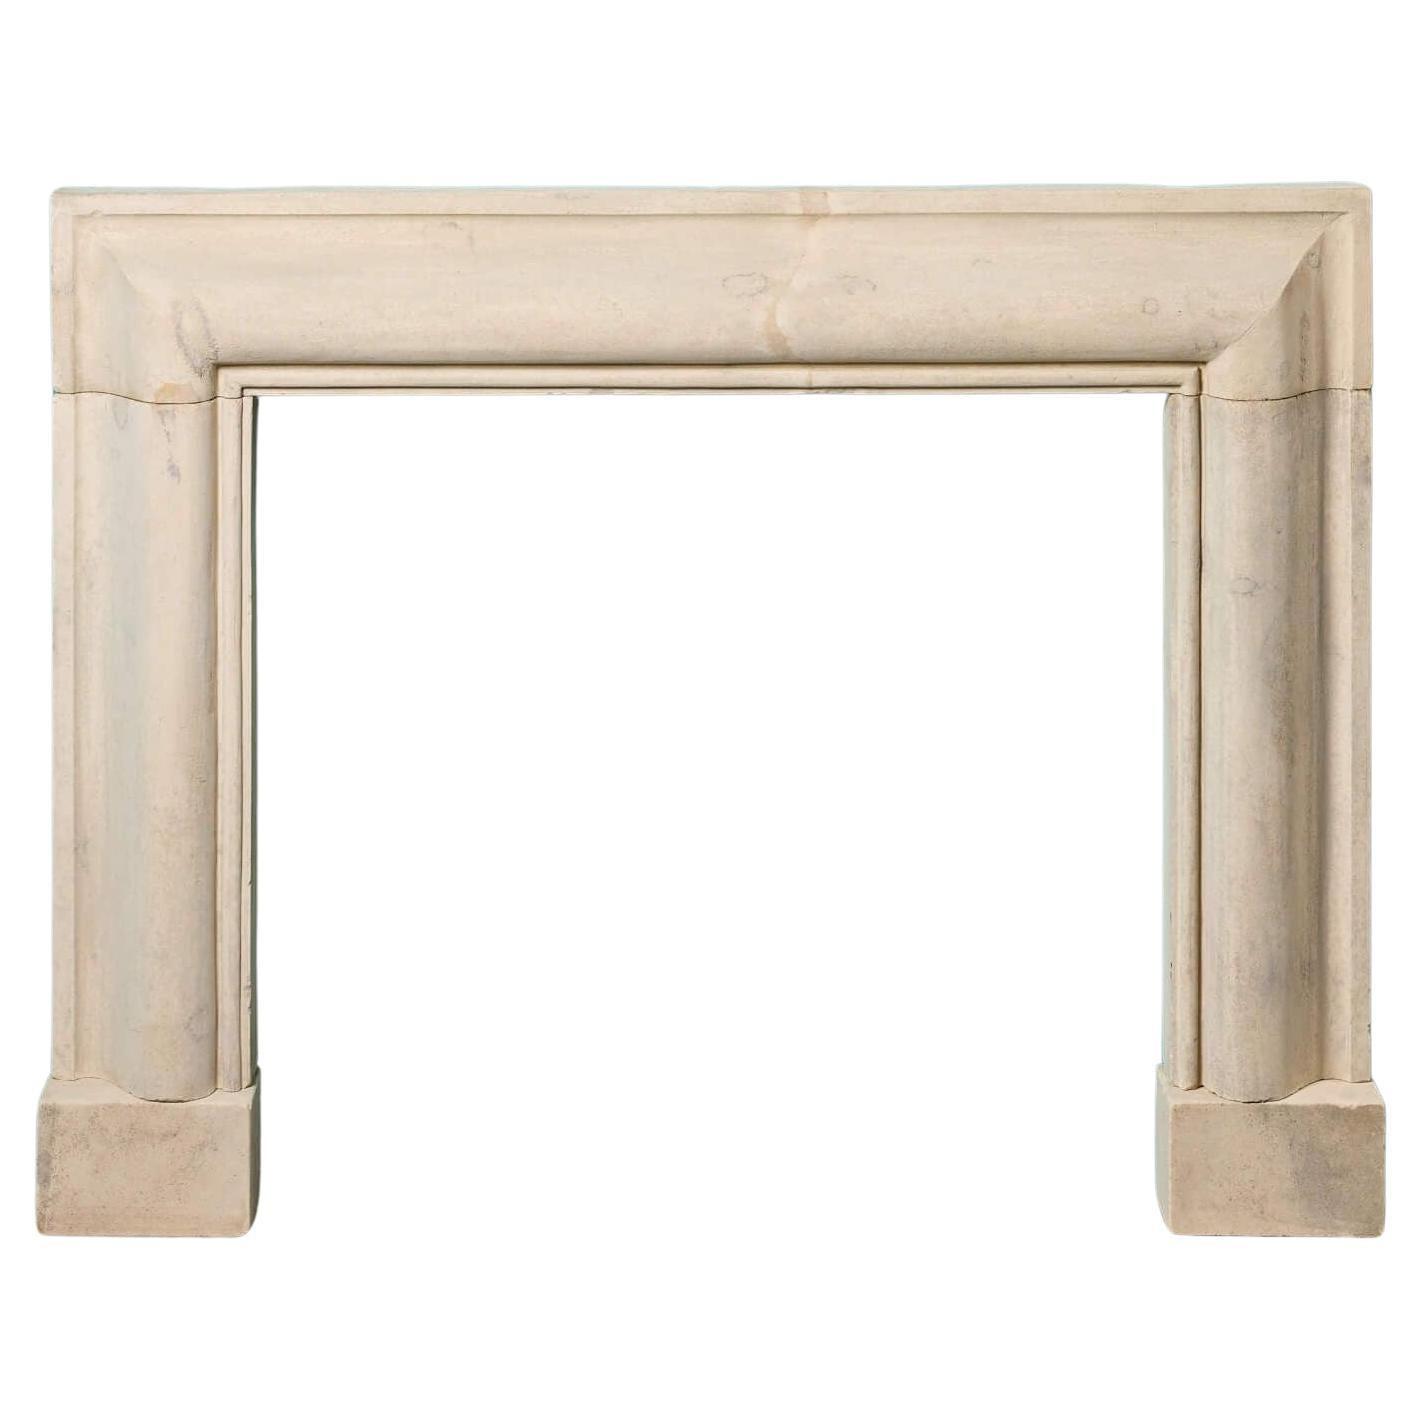 Antique English Limestone Bolection Fireplace For Sale